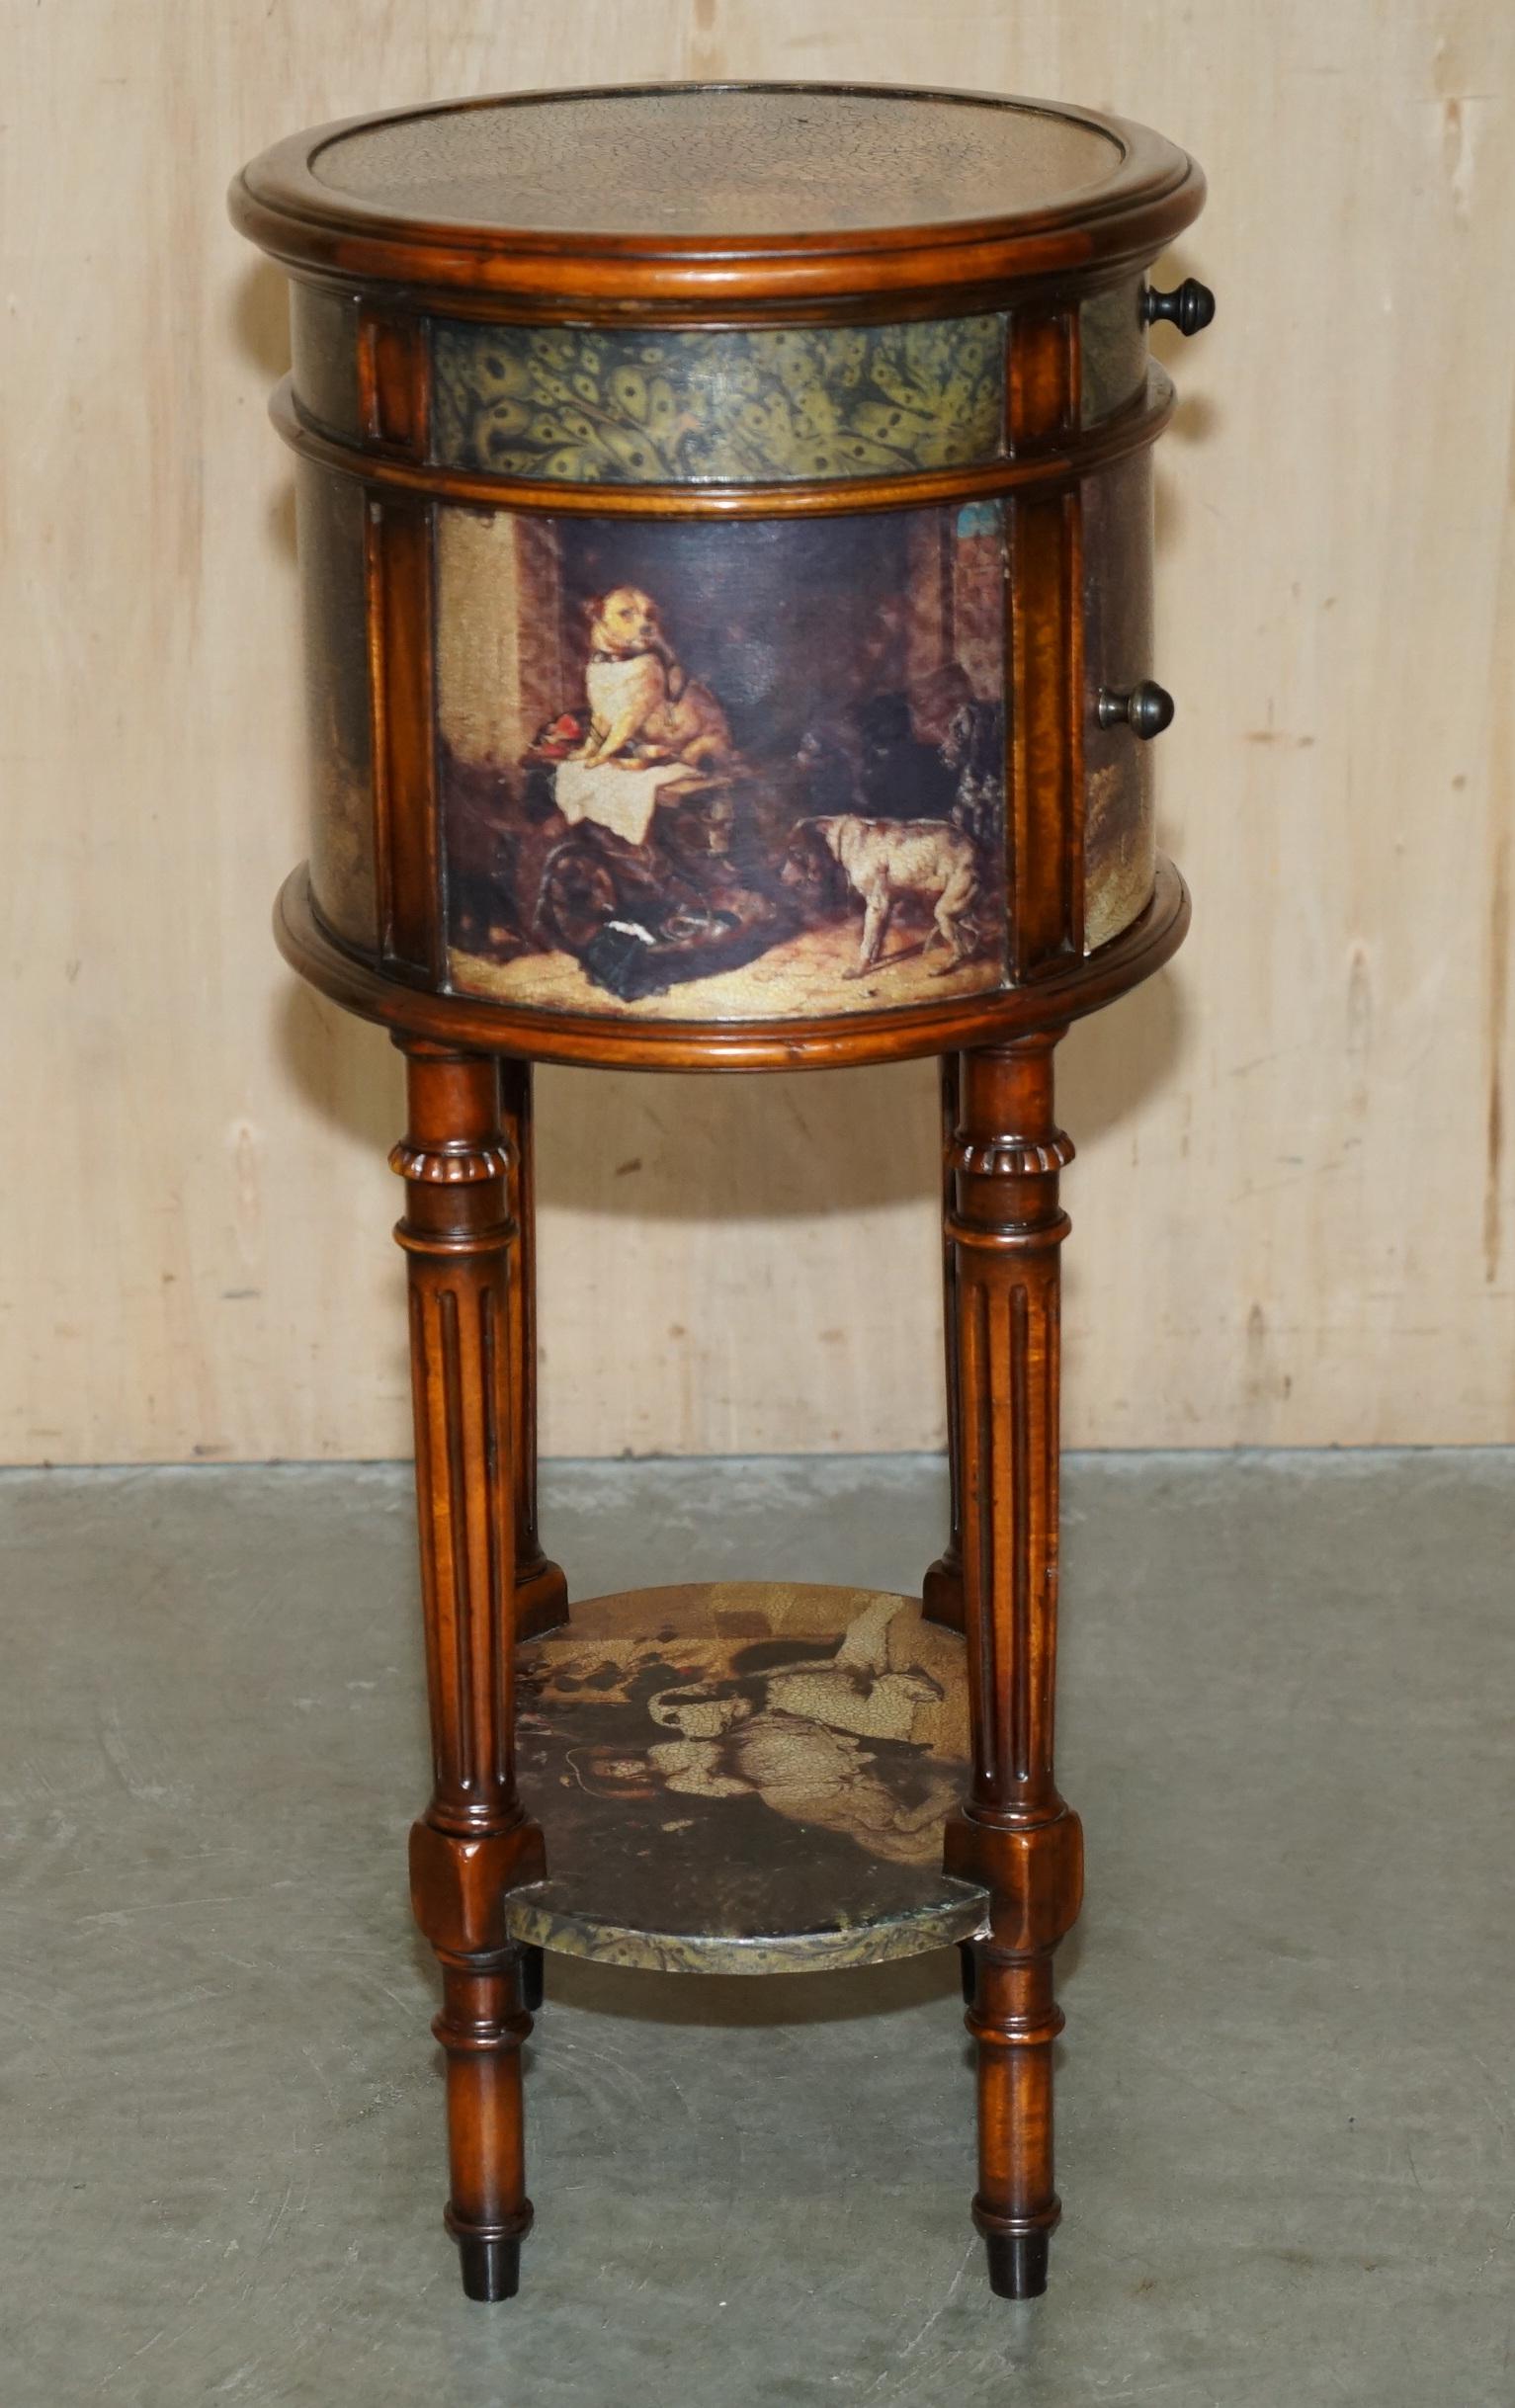 EXQUISITE TWO TIER TALL SiDE TABLE CABINET LEATHER CLADDED & PAINTED WITH DOGS For Sale 2